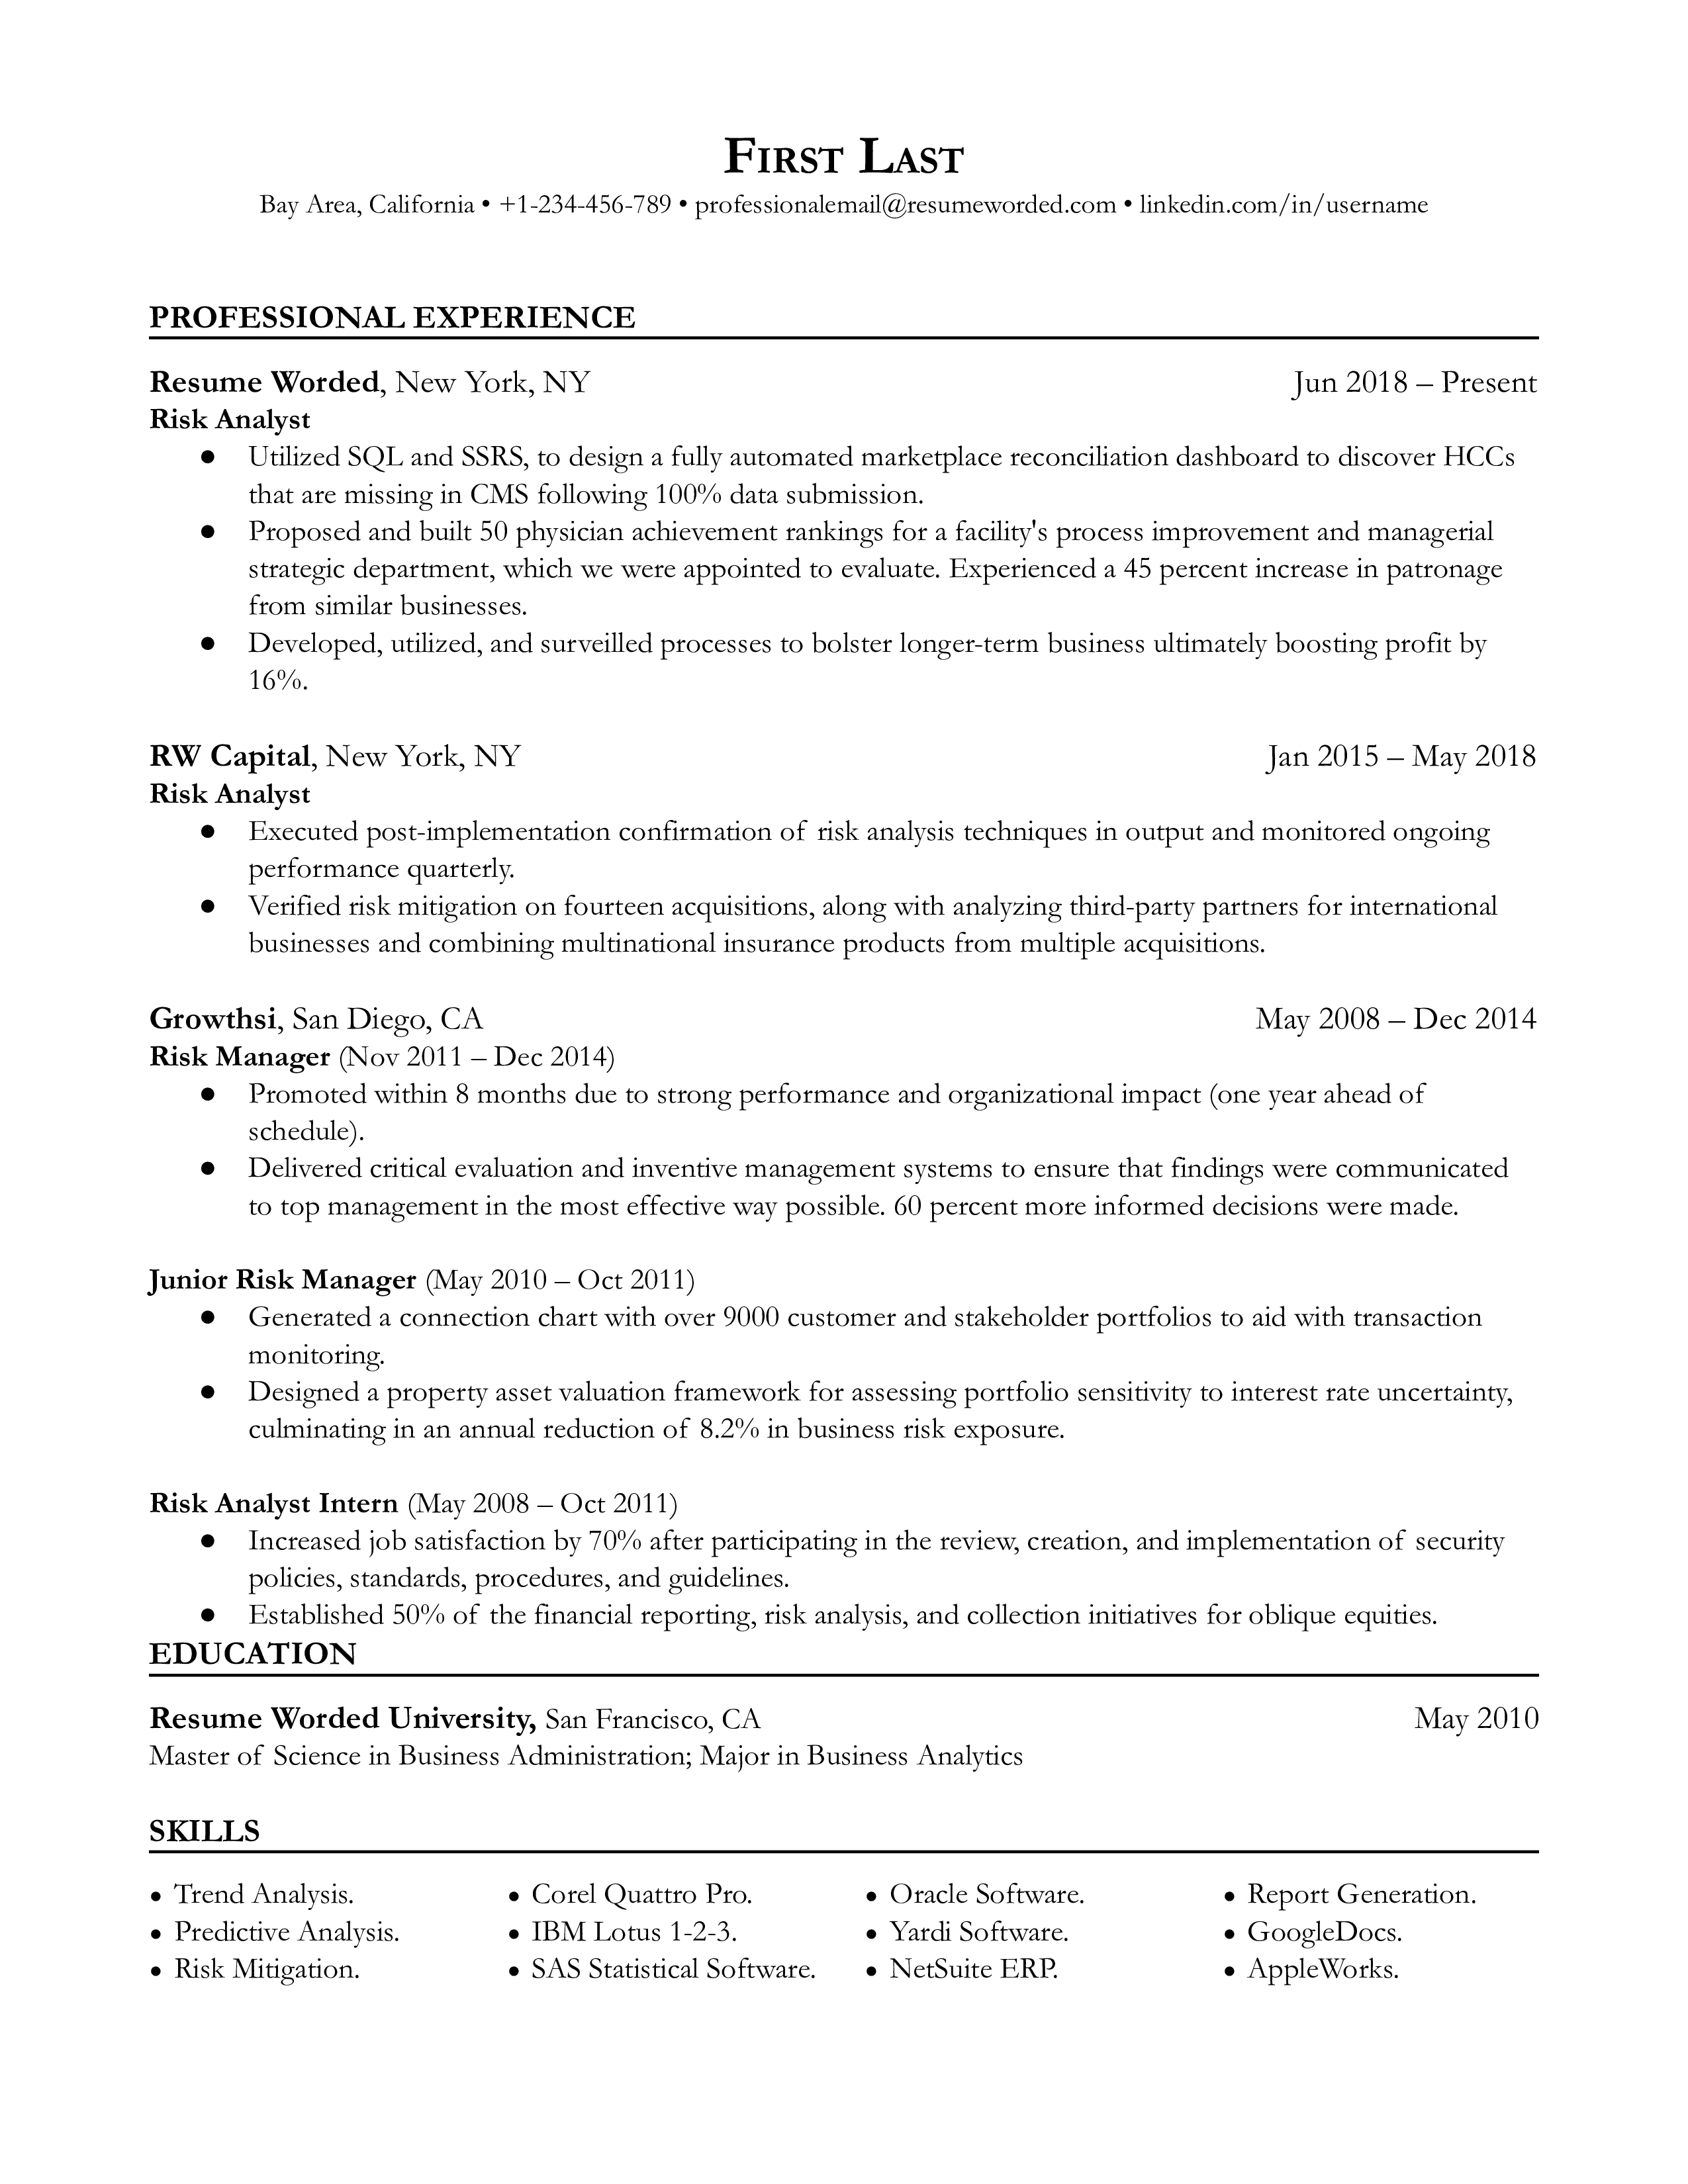 A well structured CV for a Risk Analyst role showcasing relevant competencies and achievements.